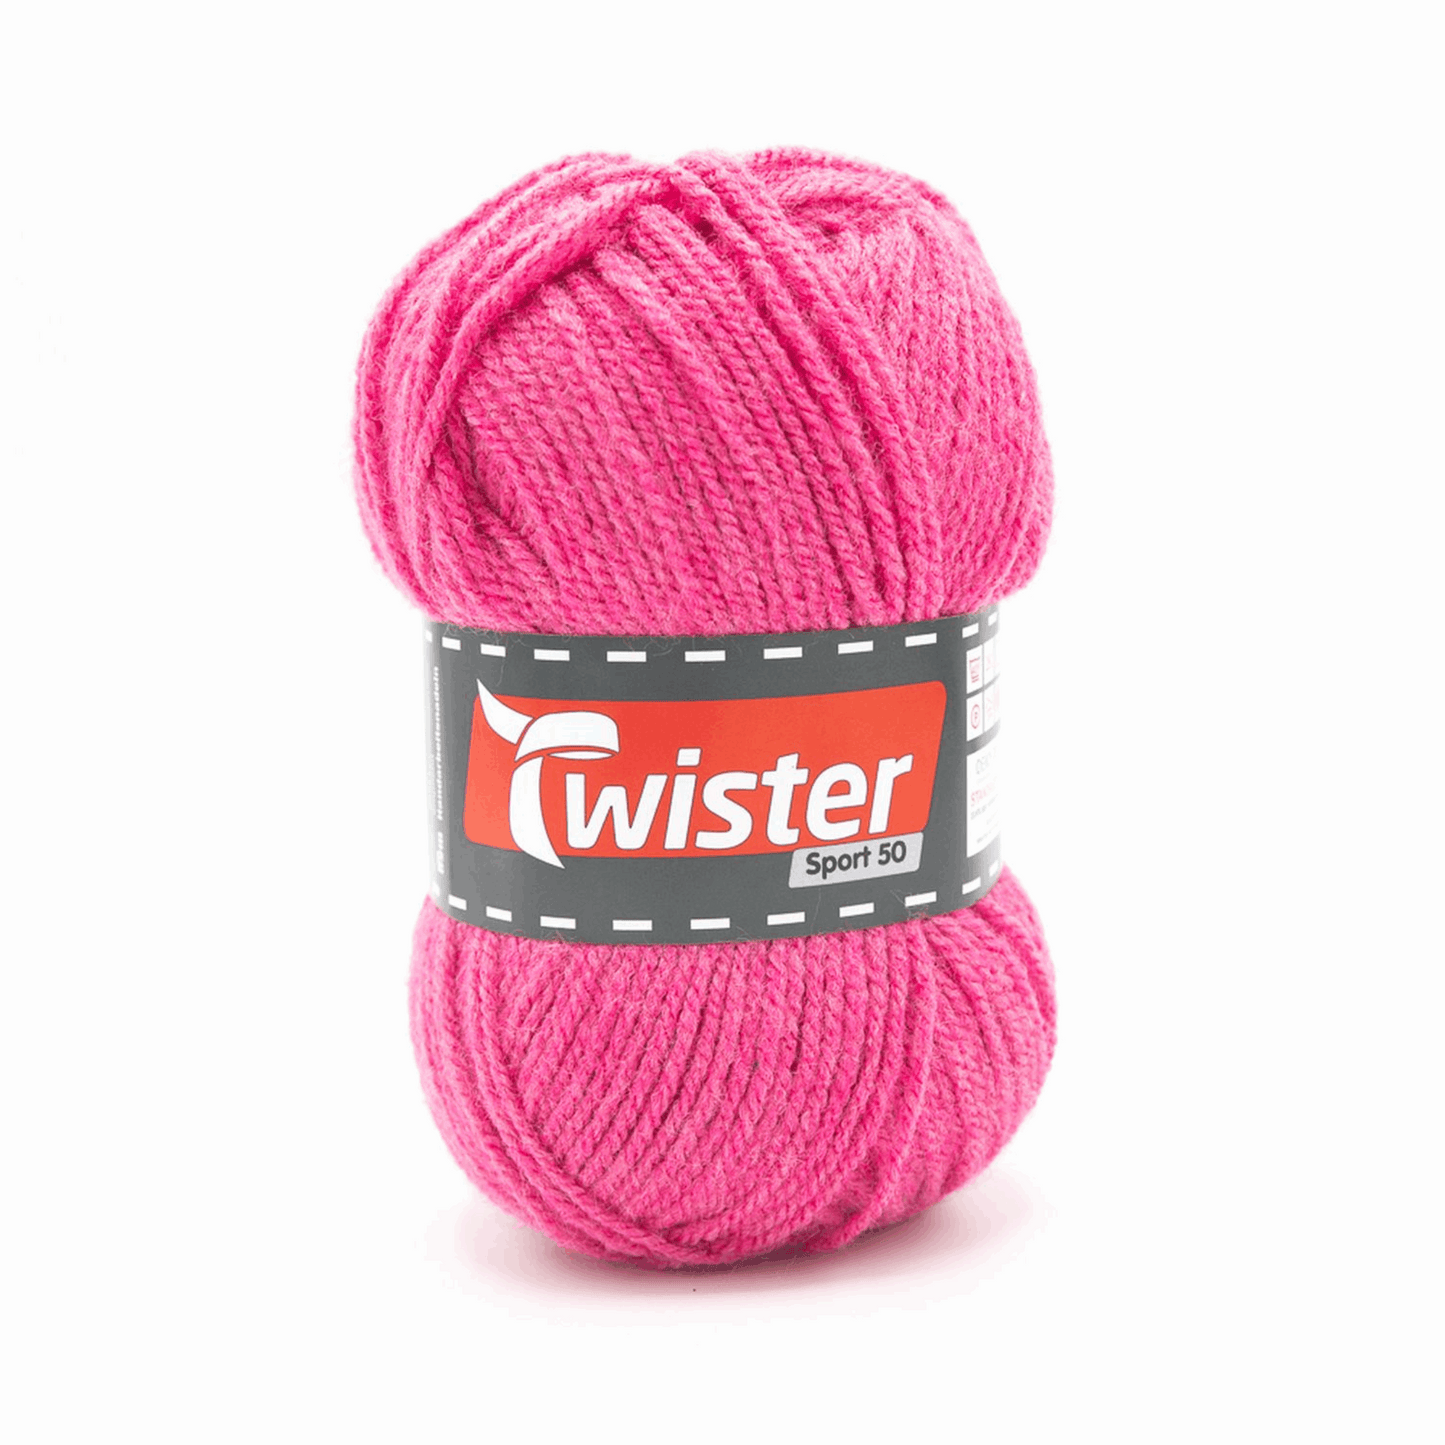 Twister Sport, 50g, 98304, Farbe cyclam 38